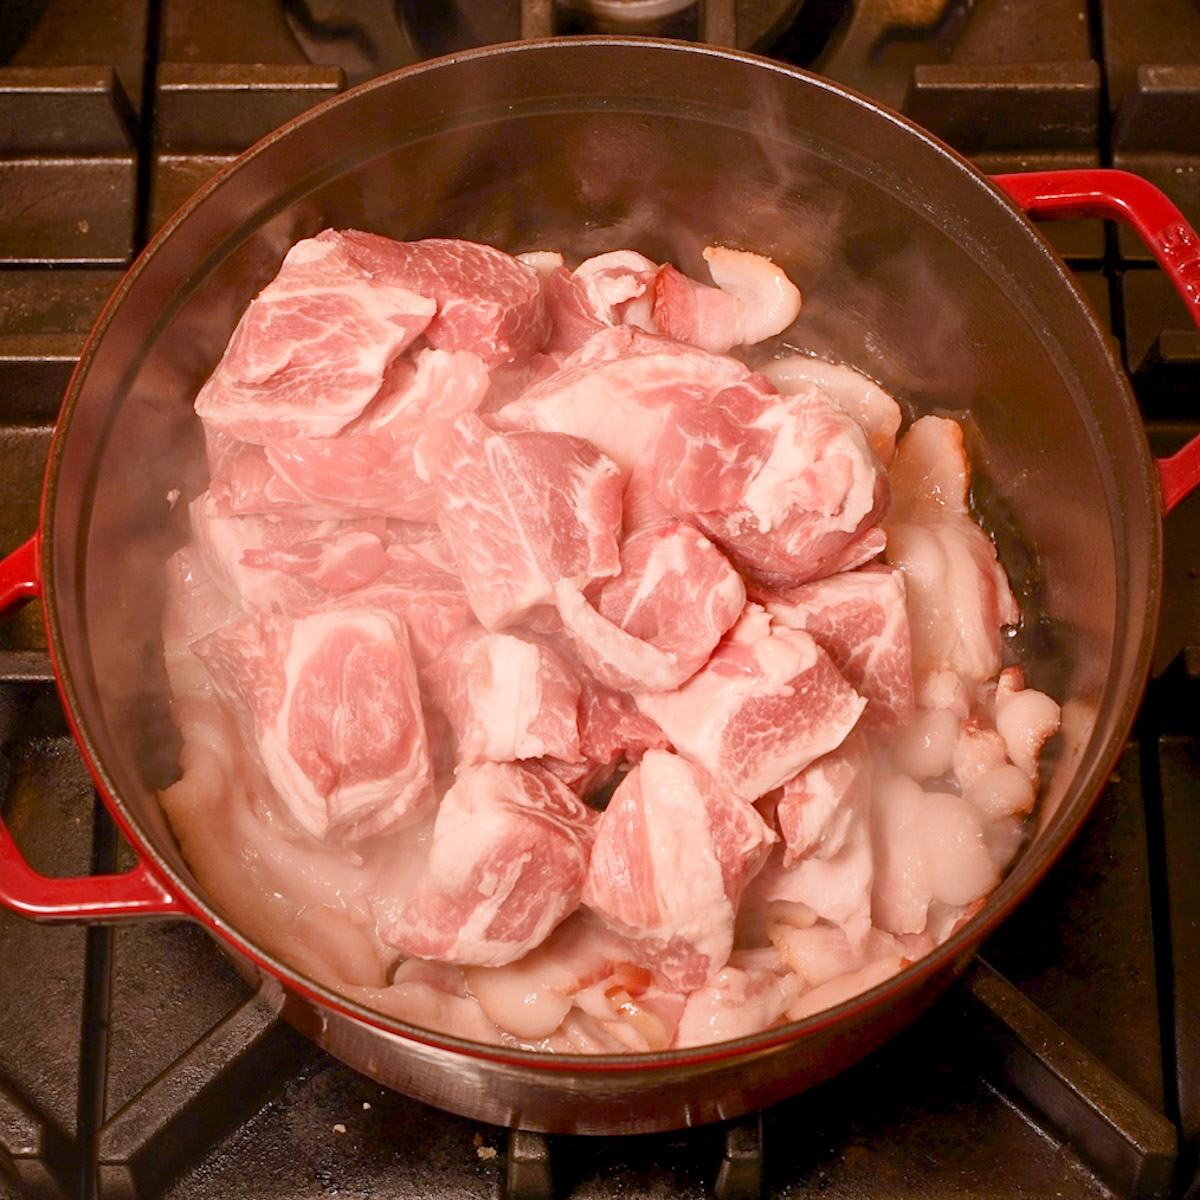 Add the pork shoulder to the Dutch oven.